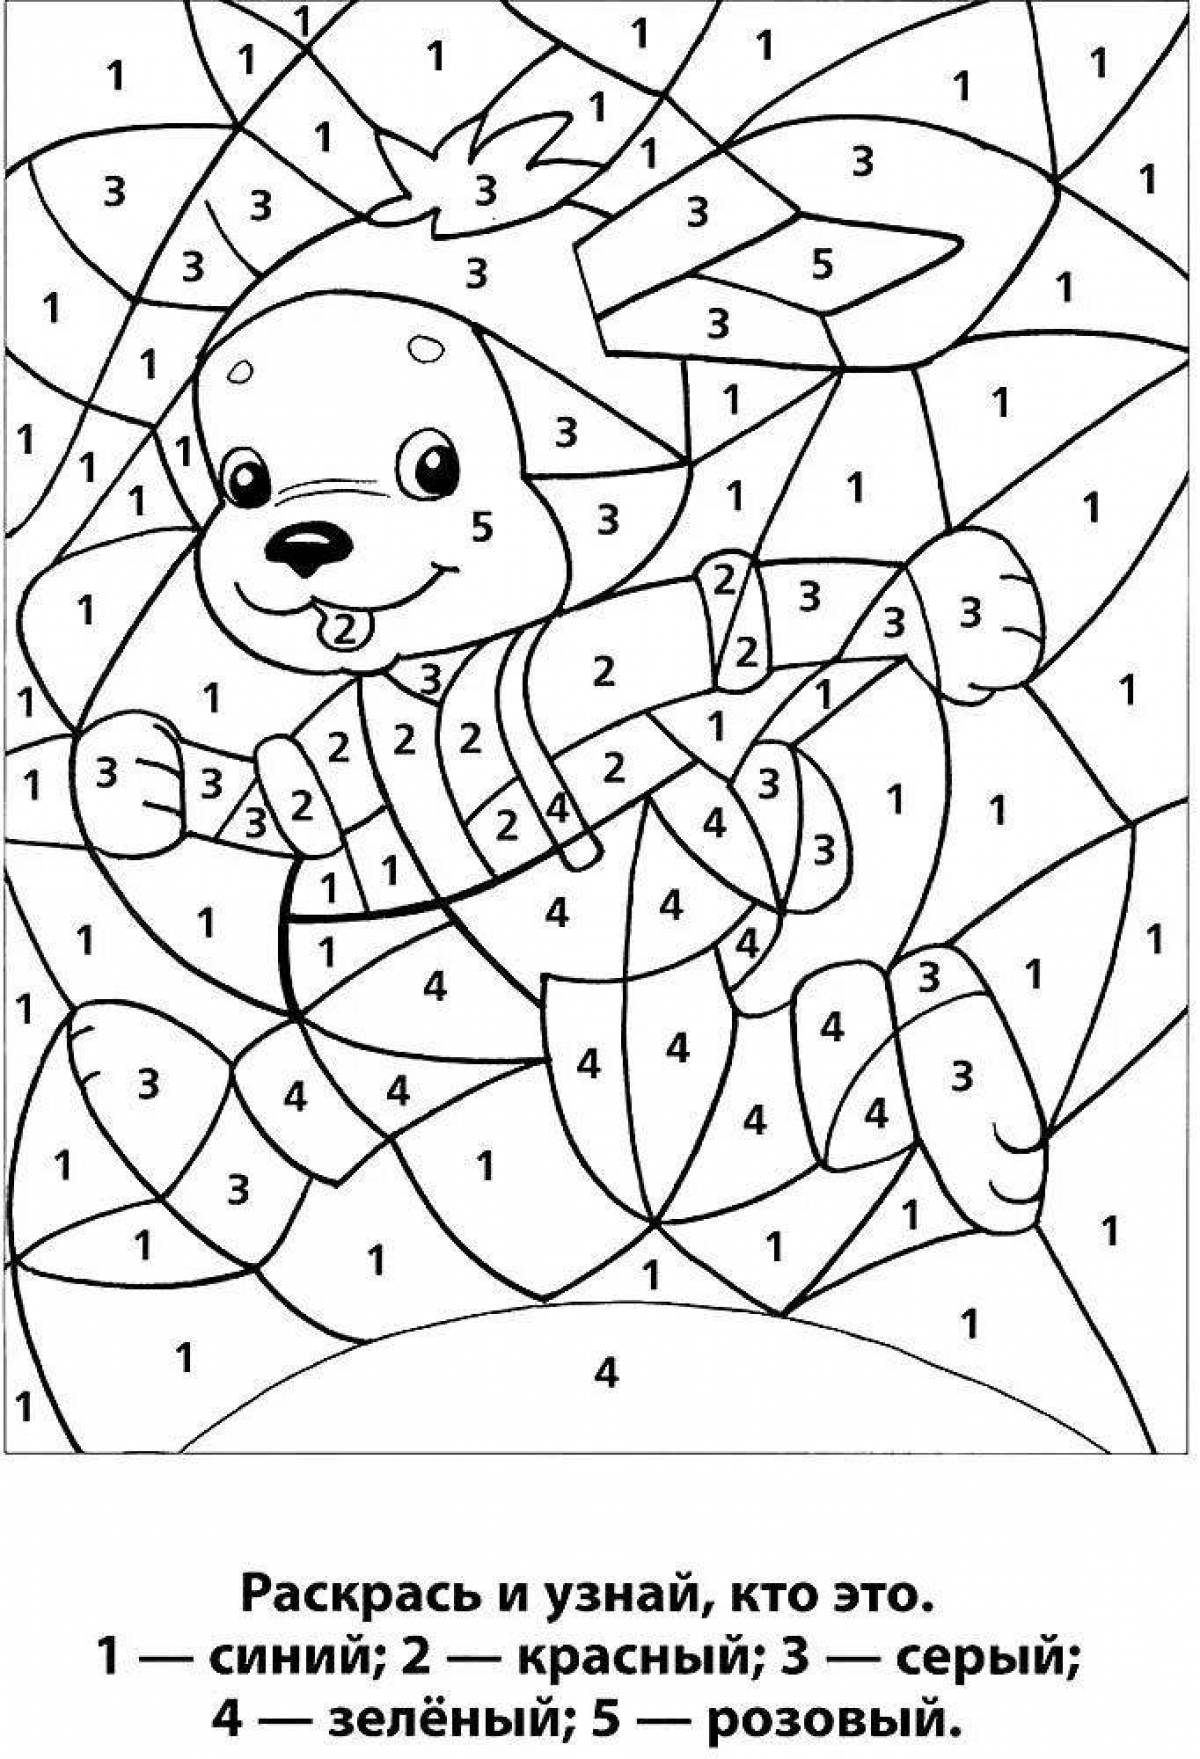 Creative coloring book for preschoolers with challenging tasks